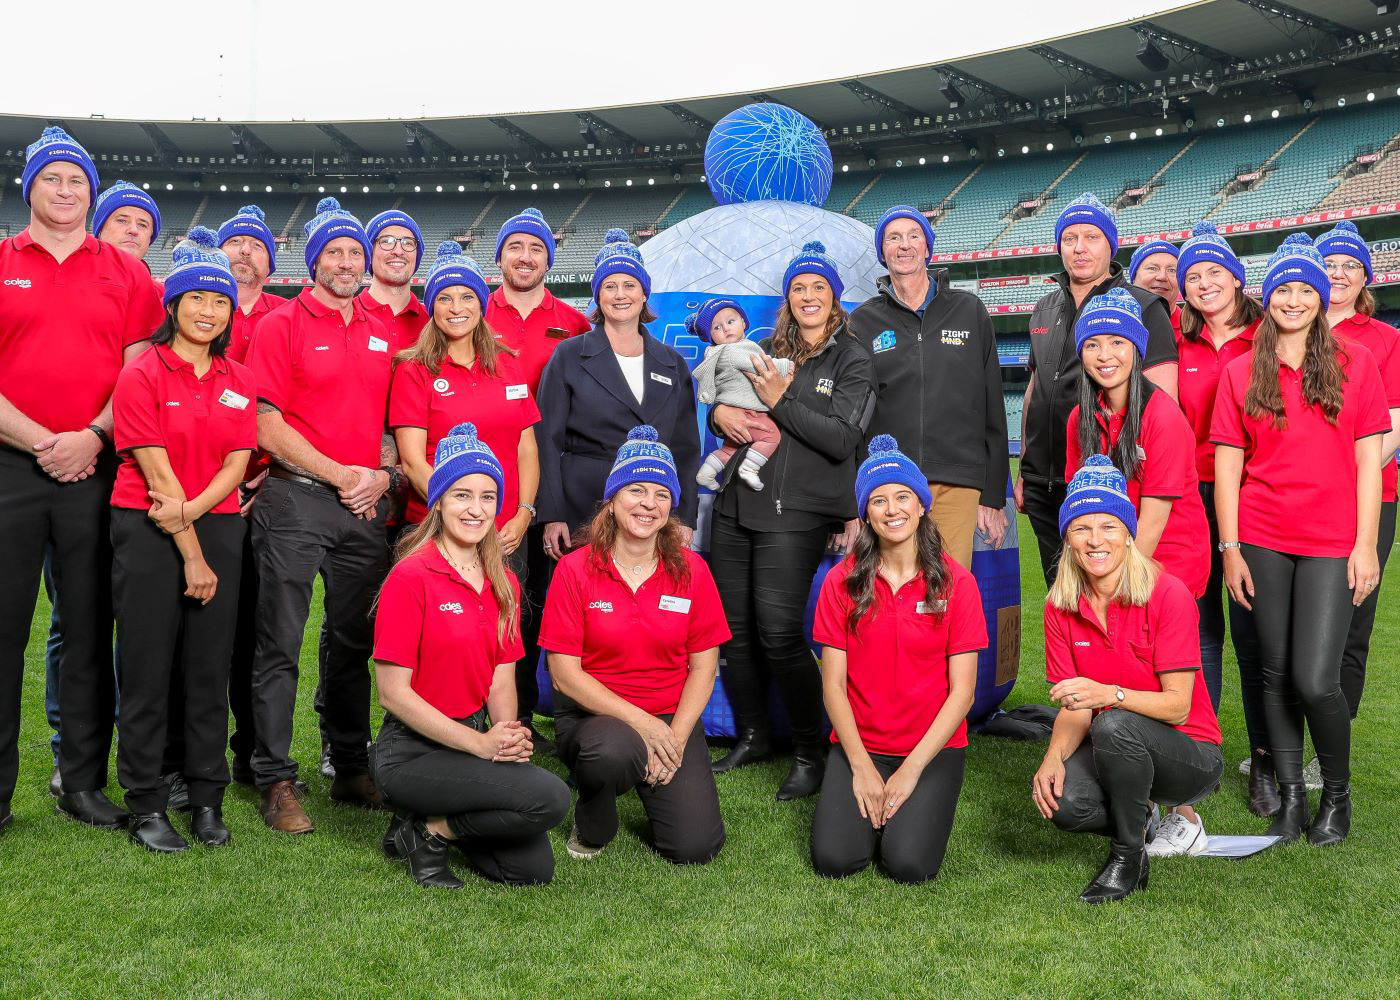 Coles team members attended the unveiling of the Big Freeze 8 beanie